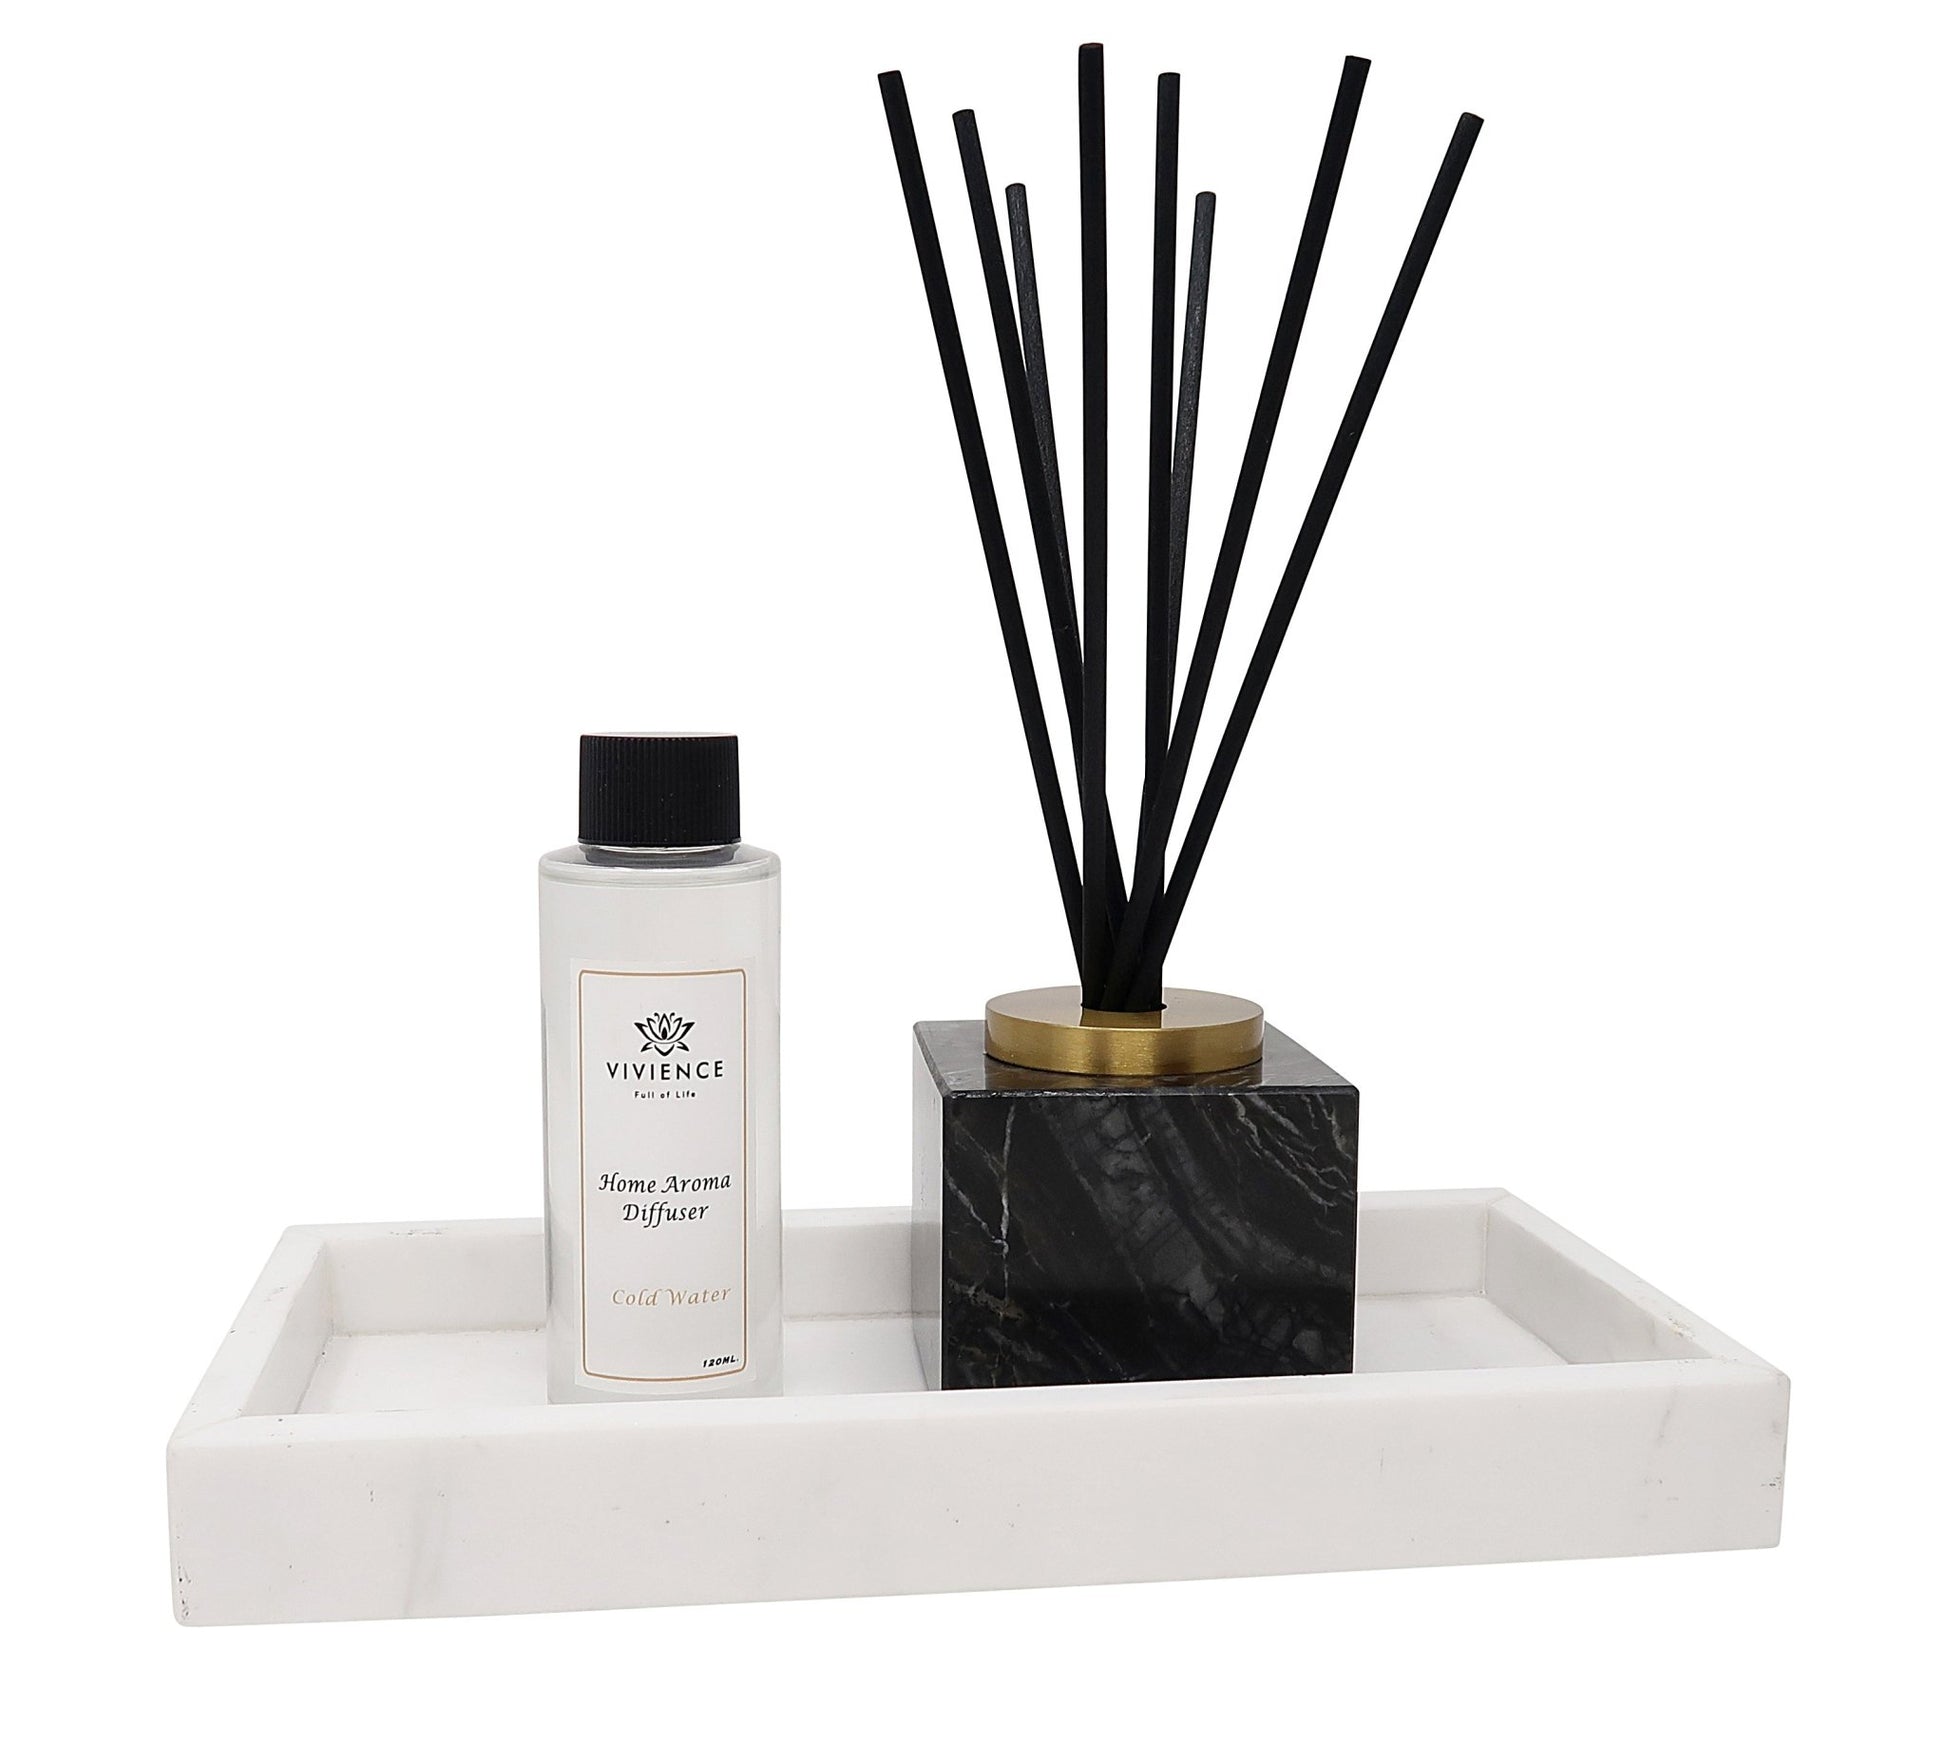 Black Marble Reed Diffuser, "Lily of the Valley" Scent - HOUSE OF SHE